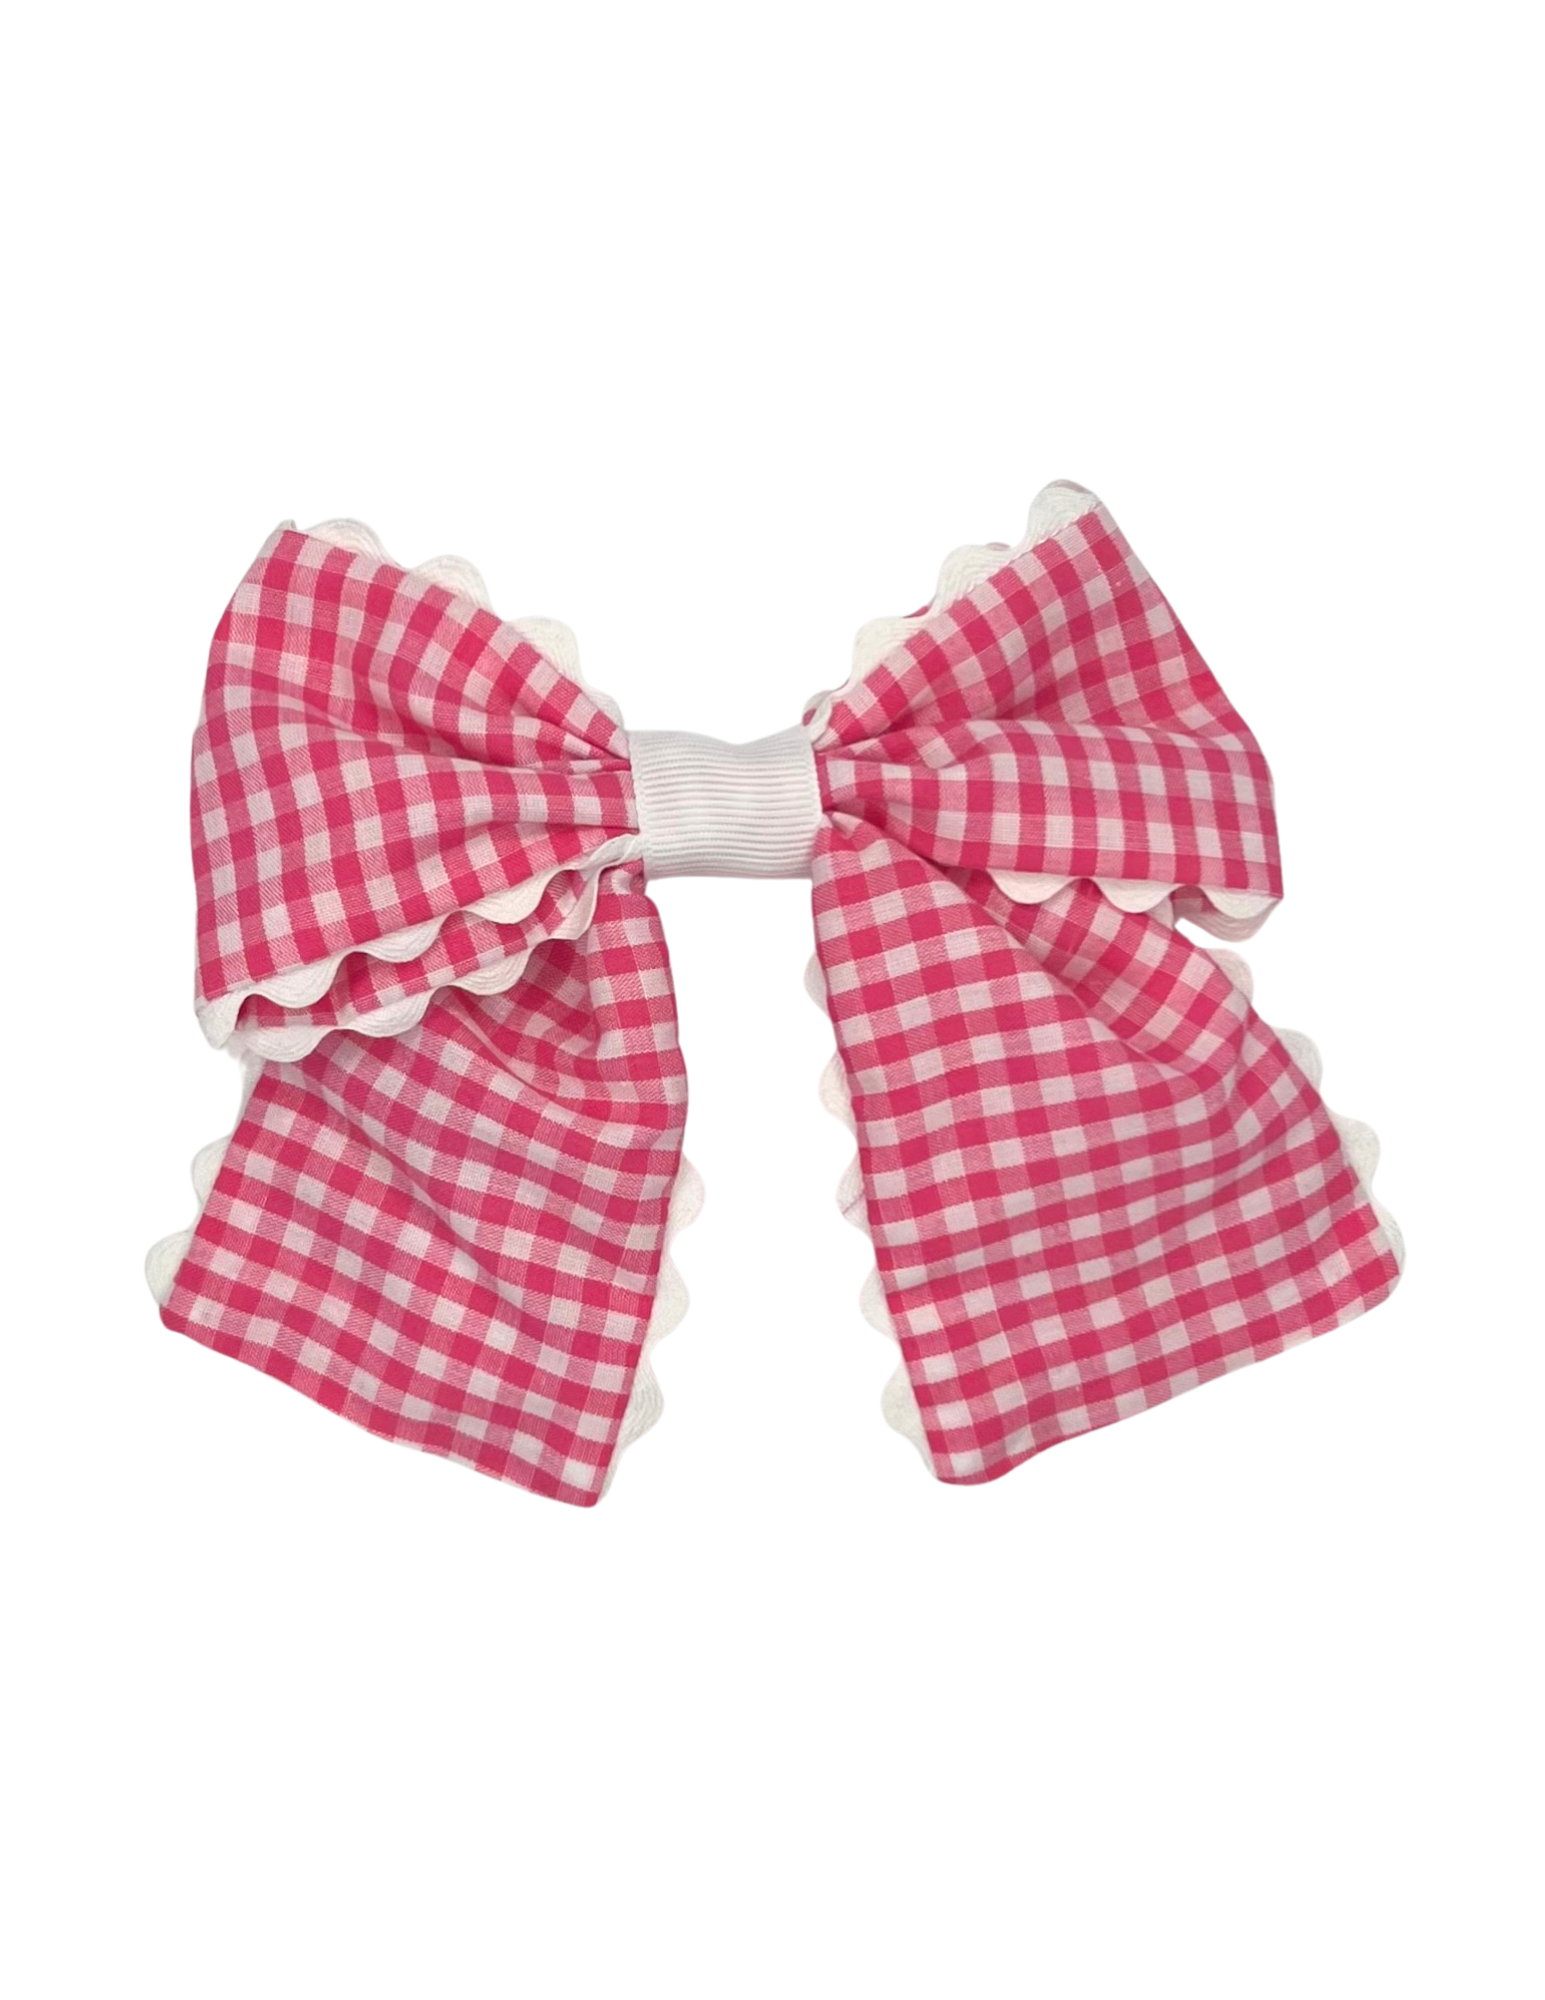 White Scalloped Hot Pink Gingham Bow